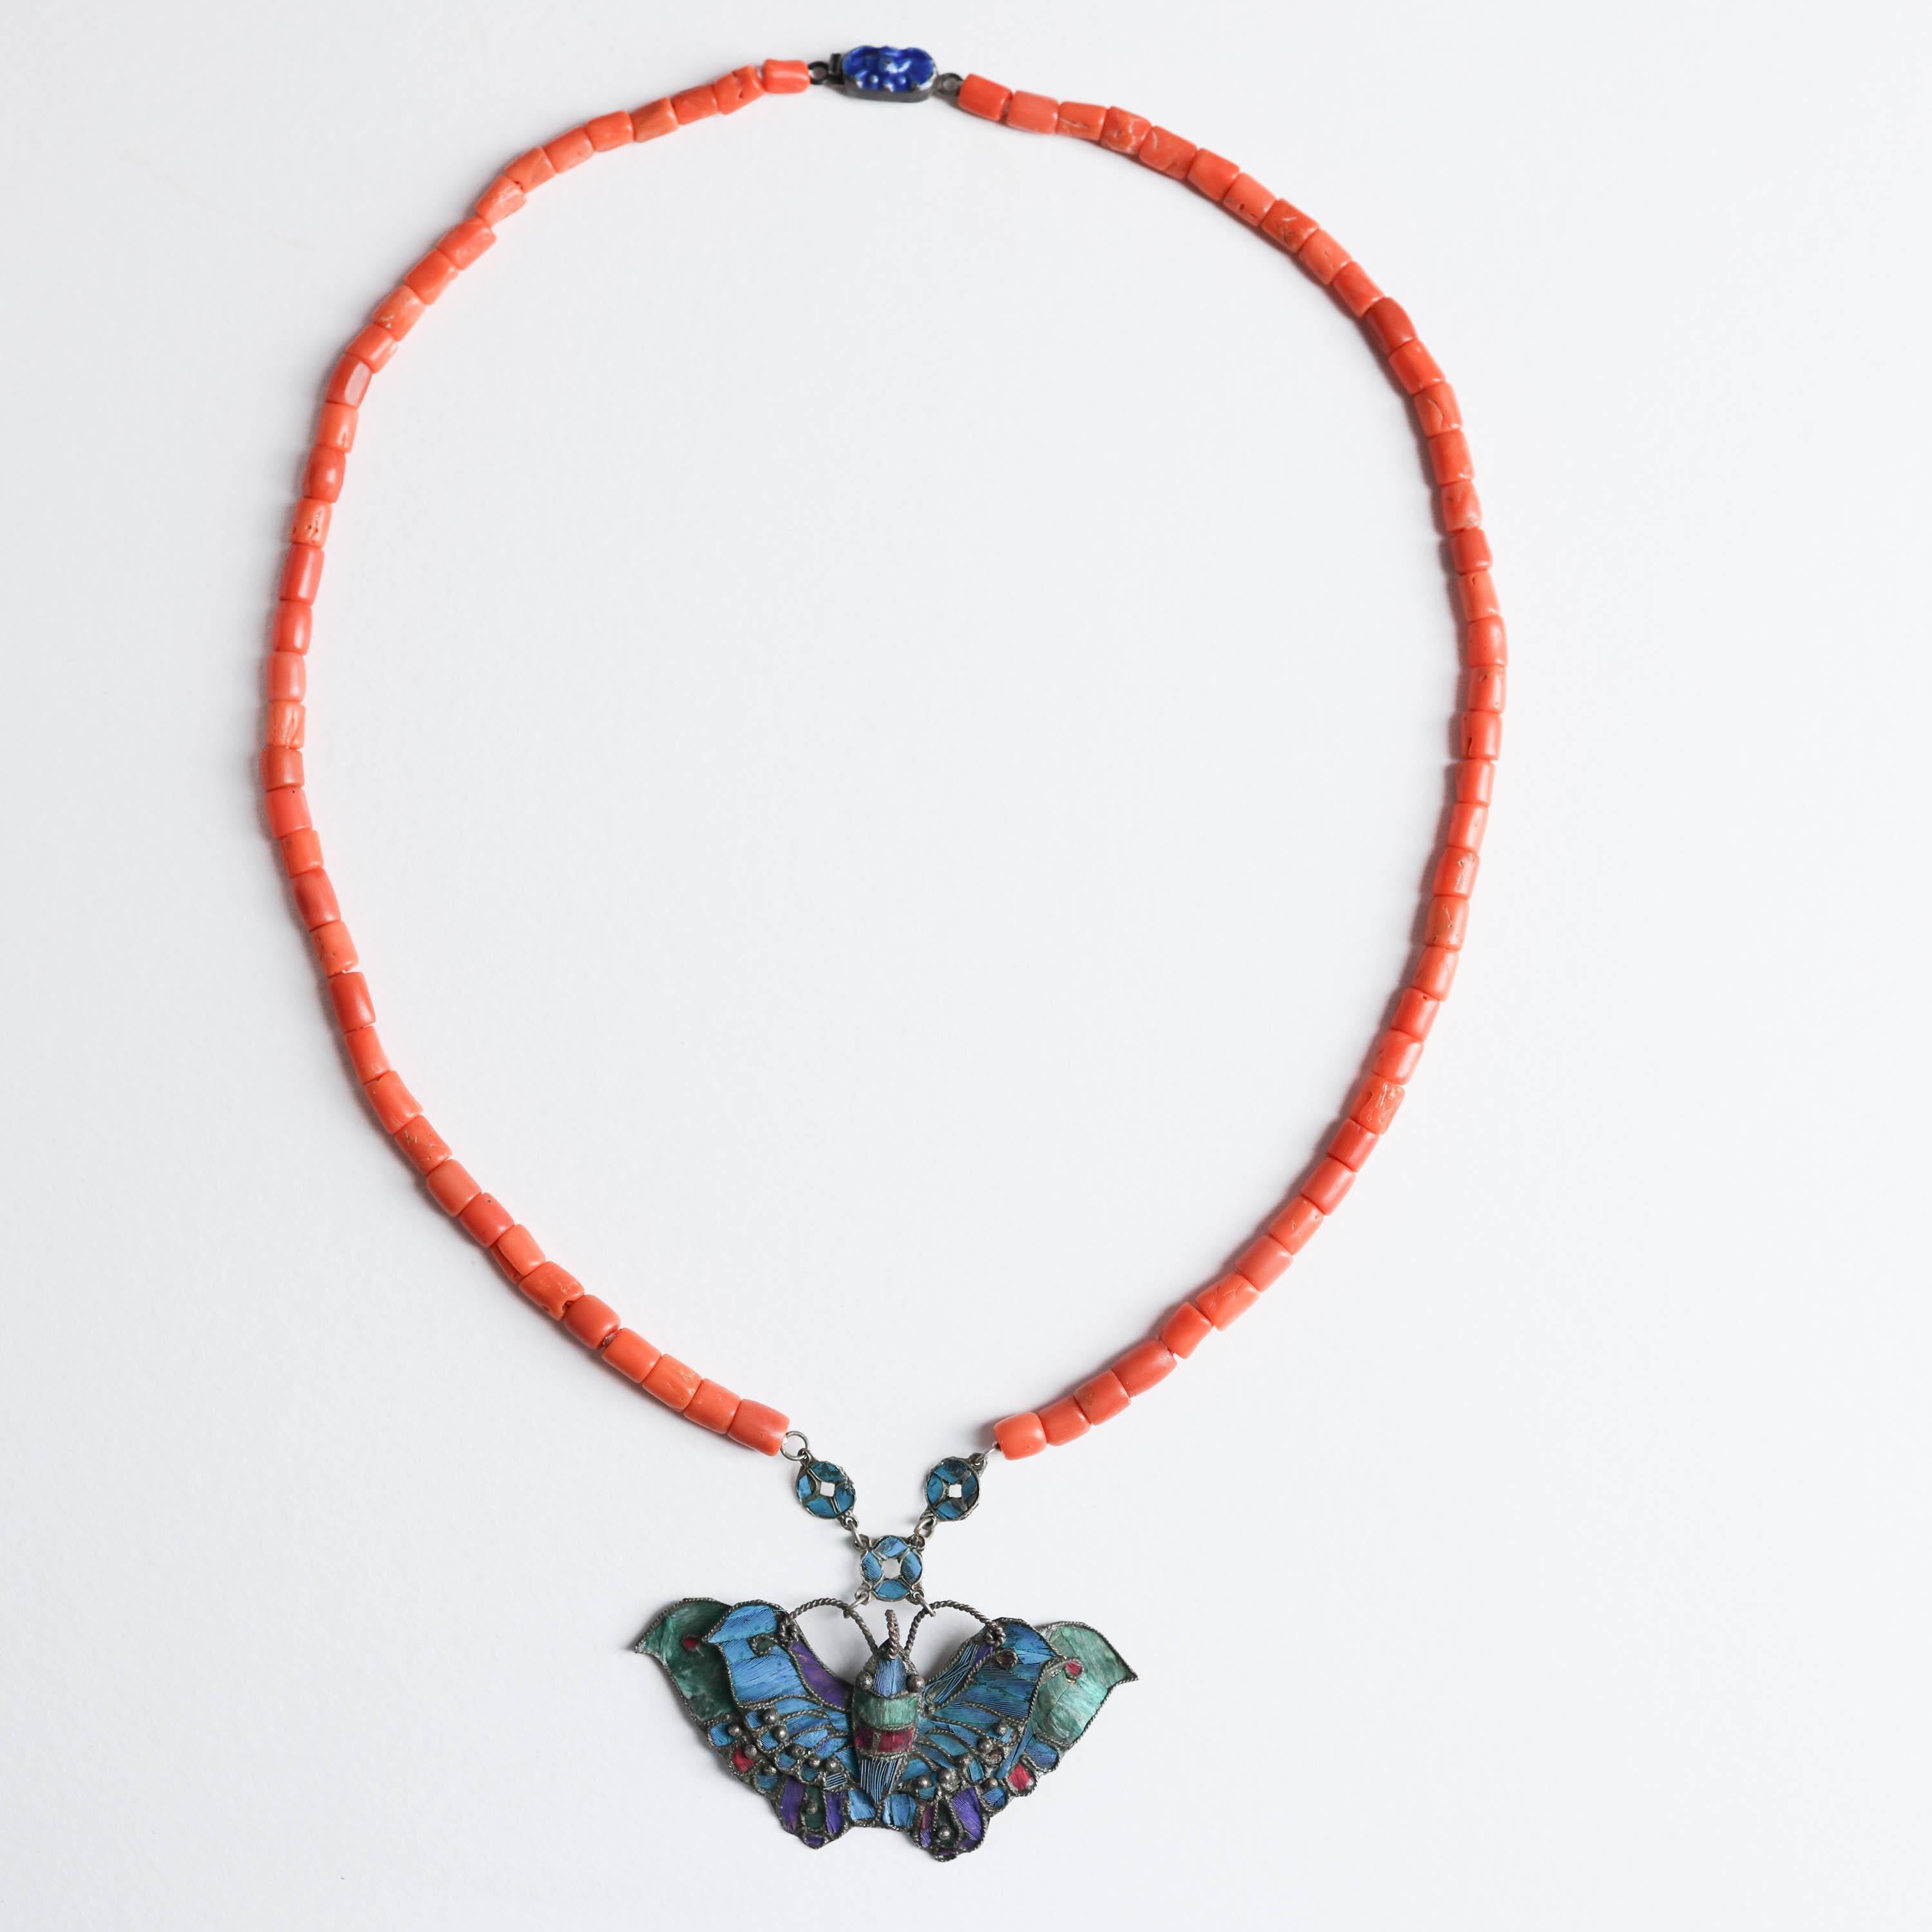 This strikingly unique Chinese Antique coral necklace from the Art Nouveau-era is an elegant and impressive example of the Chinese art form known as tian-tsui. 

Tian-tsui refers to the decoration of metalwork with the azure, iridescent feathers of